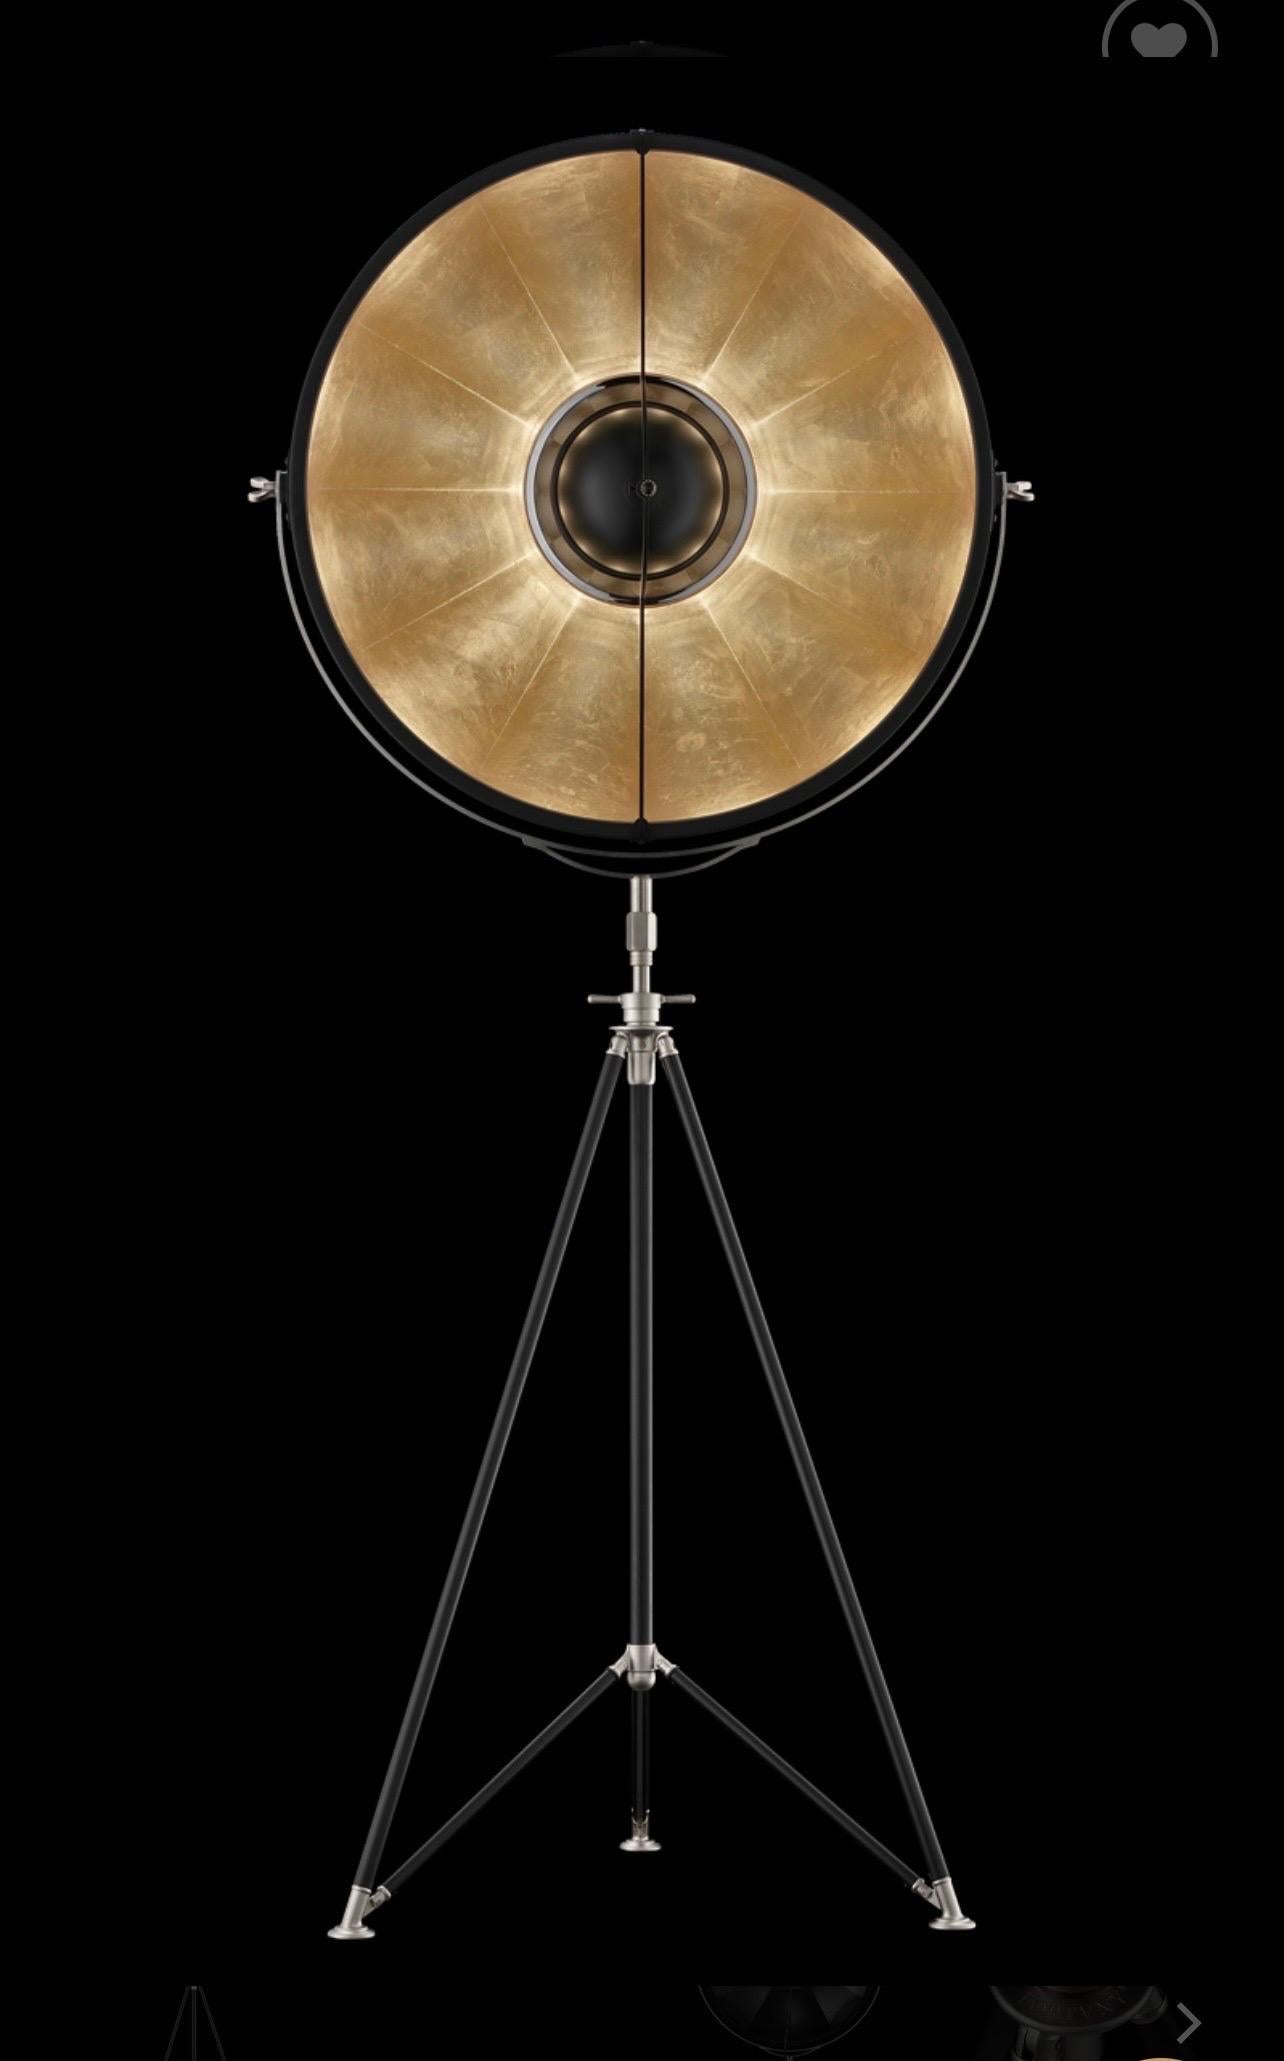 Mariano Fortuny loved to experiment with light, and was a famous inventor and stage lighting technician in his day. In fact his developments are still used in prestigious theatres around the world.

Fortuny® floor lamps are the result of that